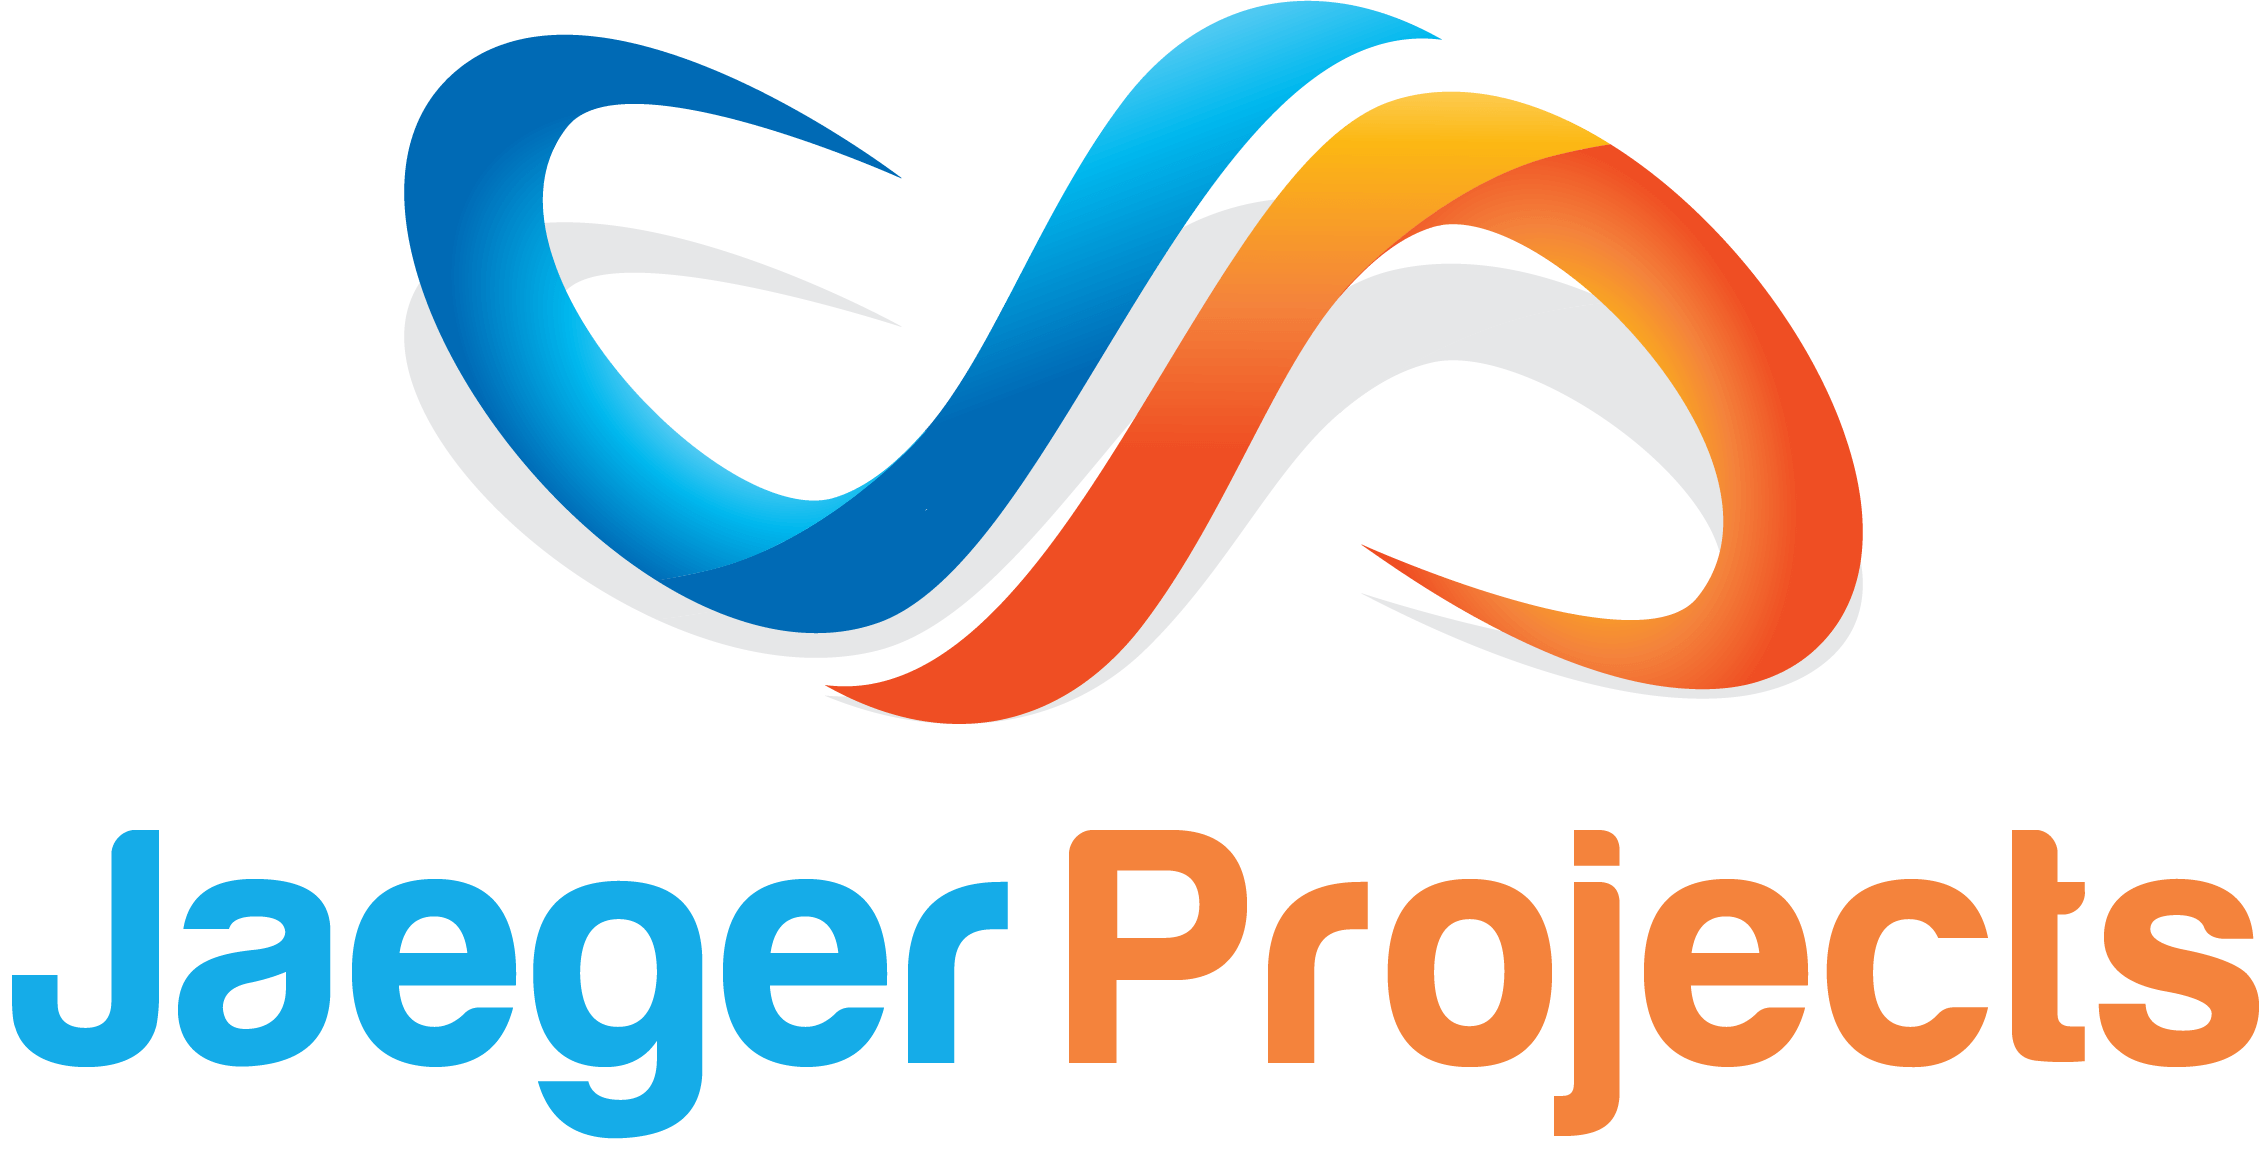 Jaeger Projects